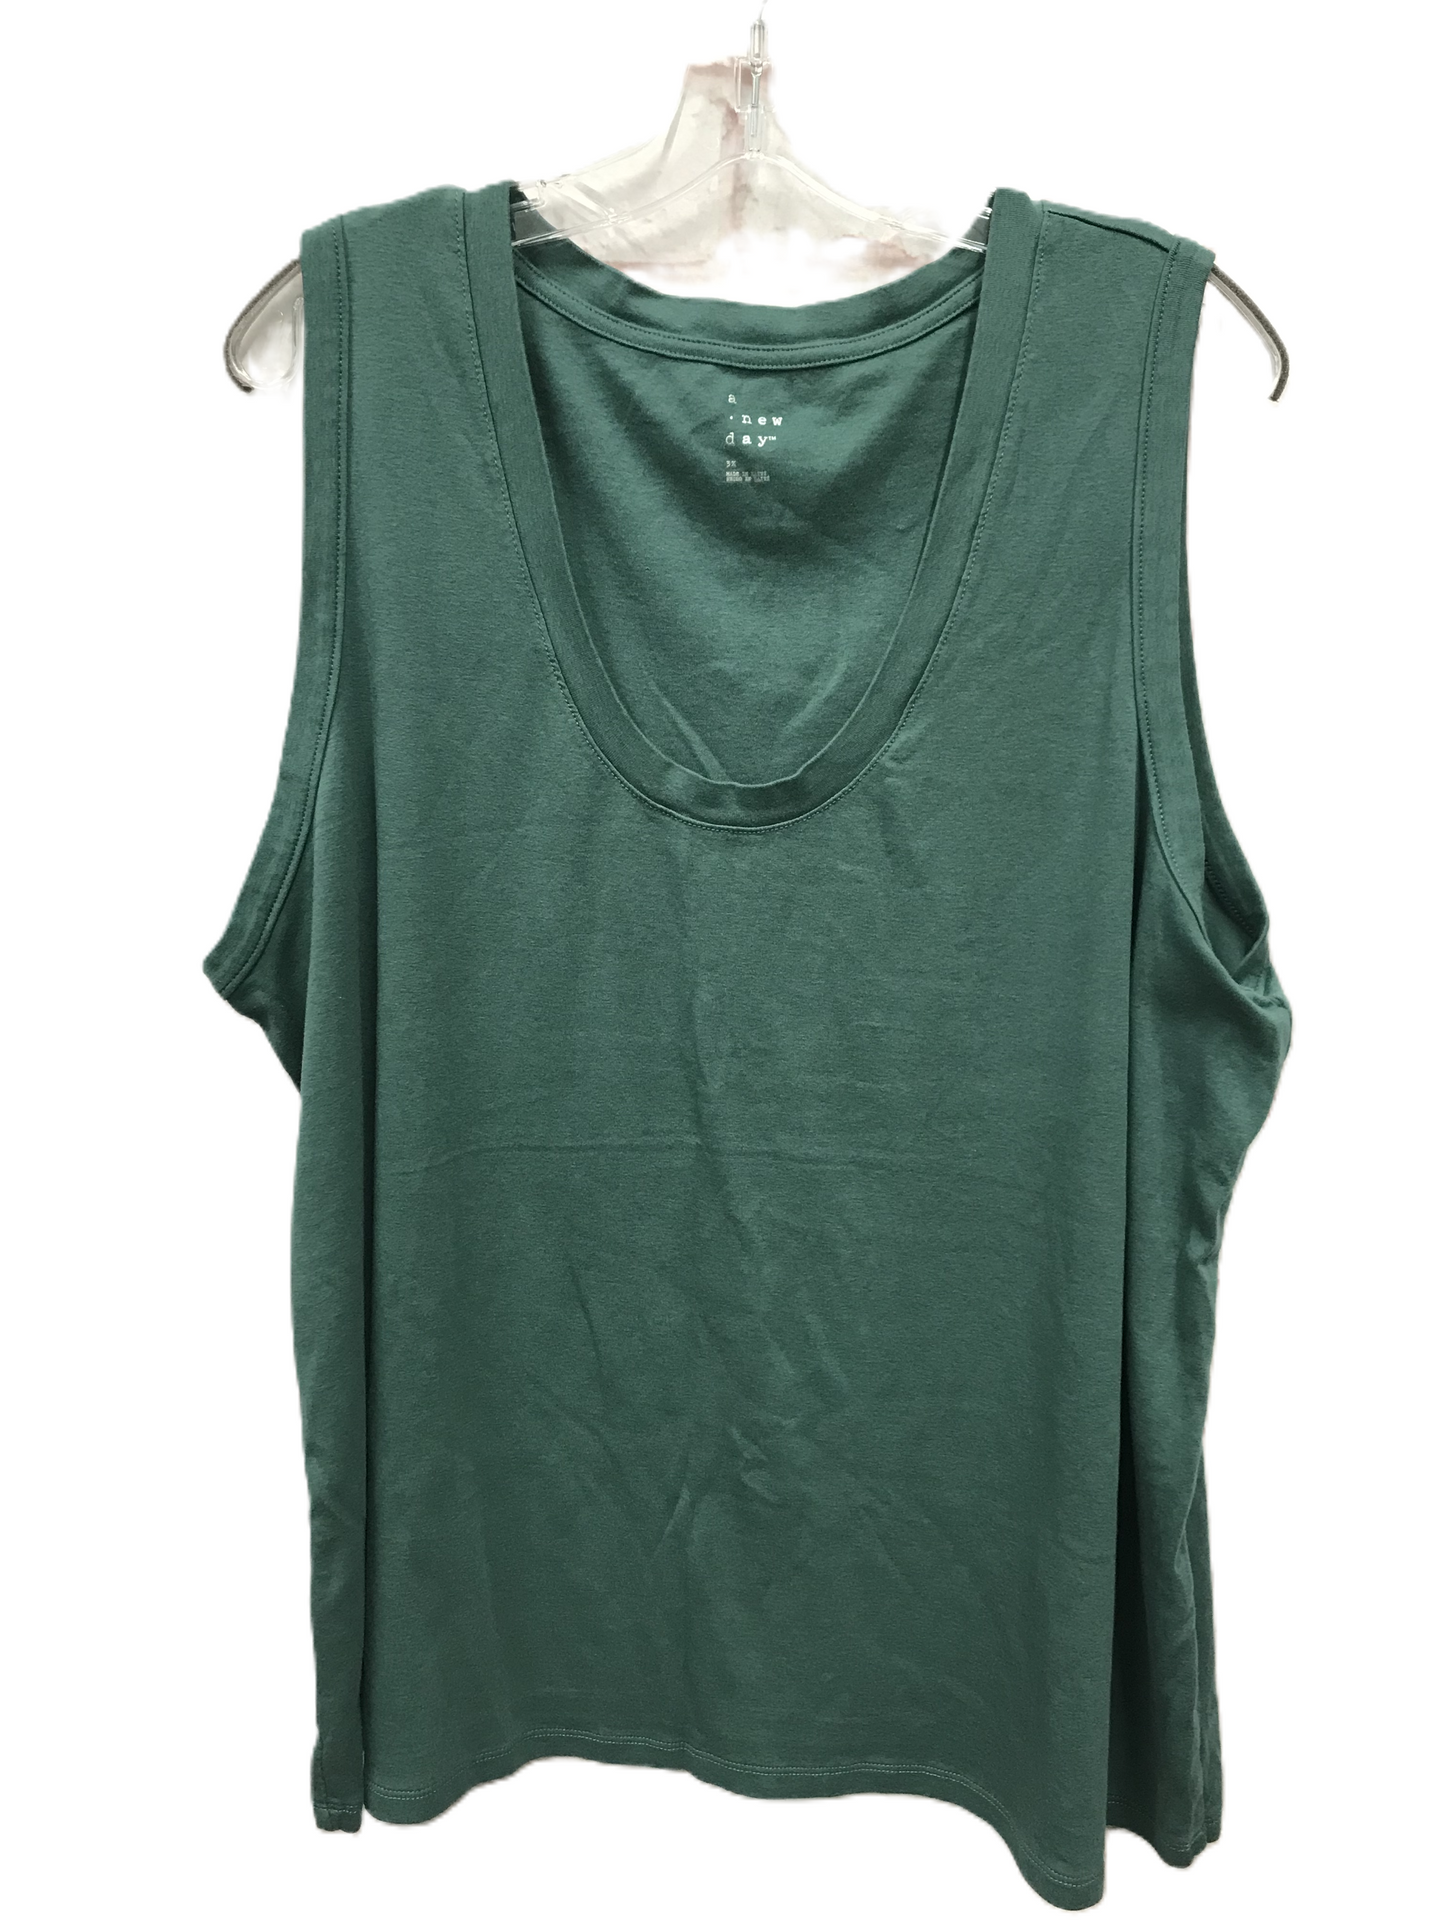 Green Top Sleeveless By A New Day, Size: 3x